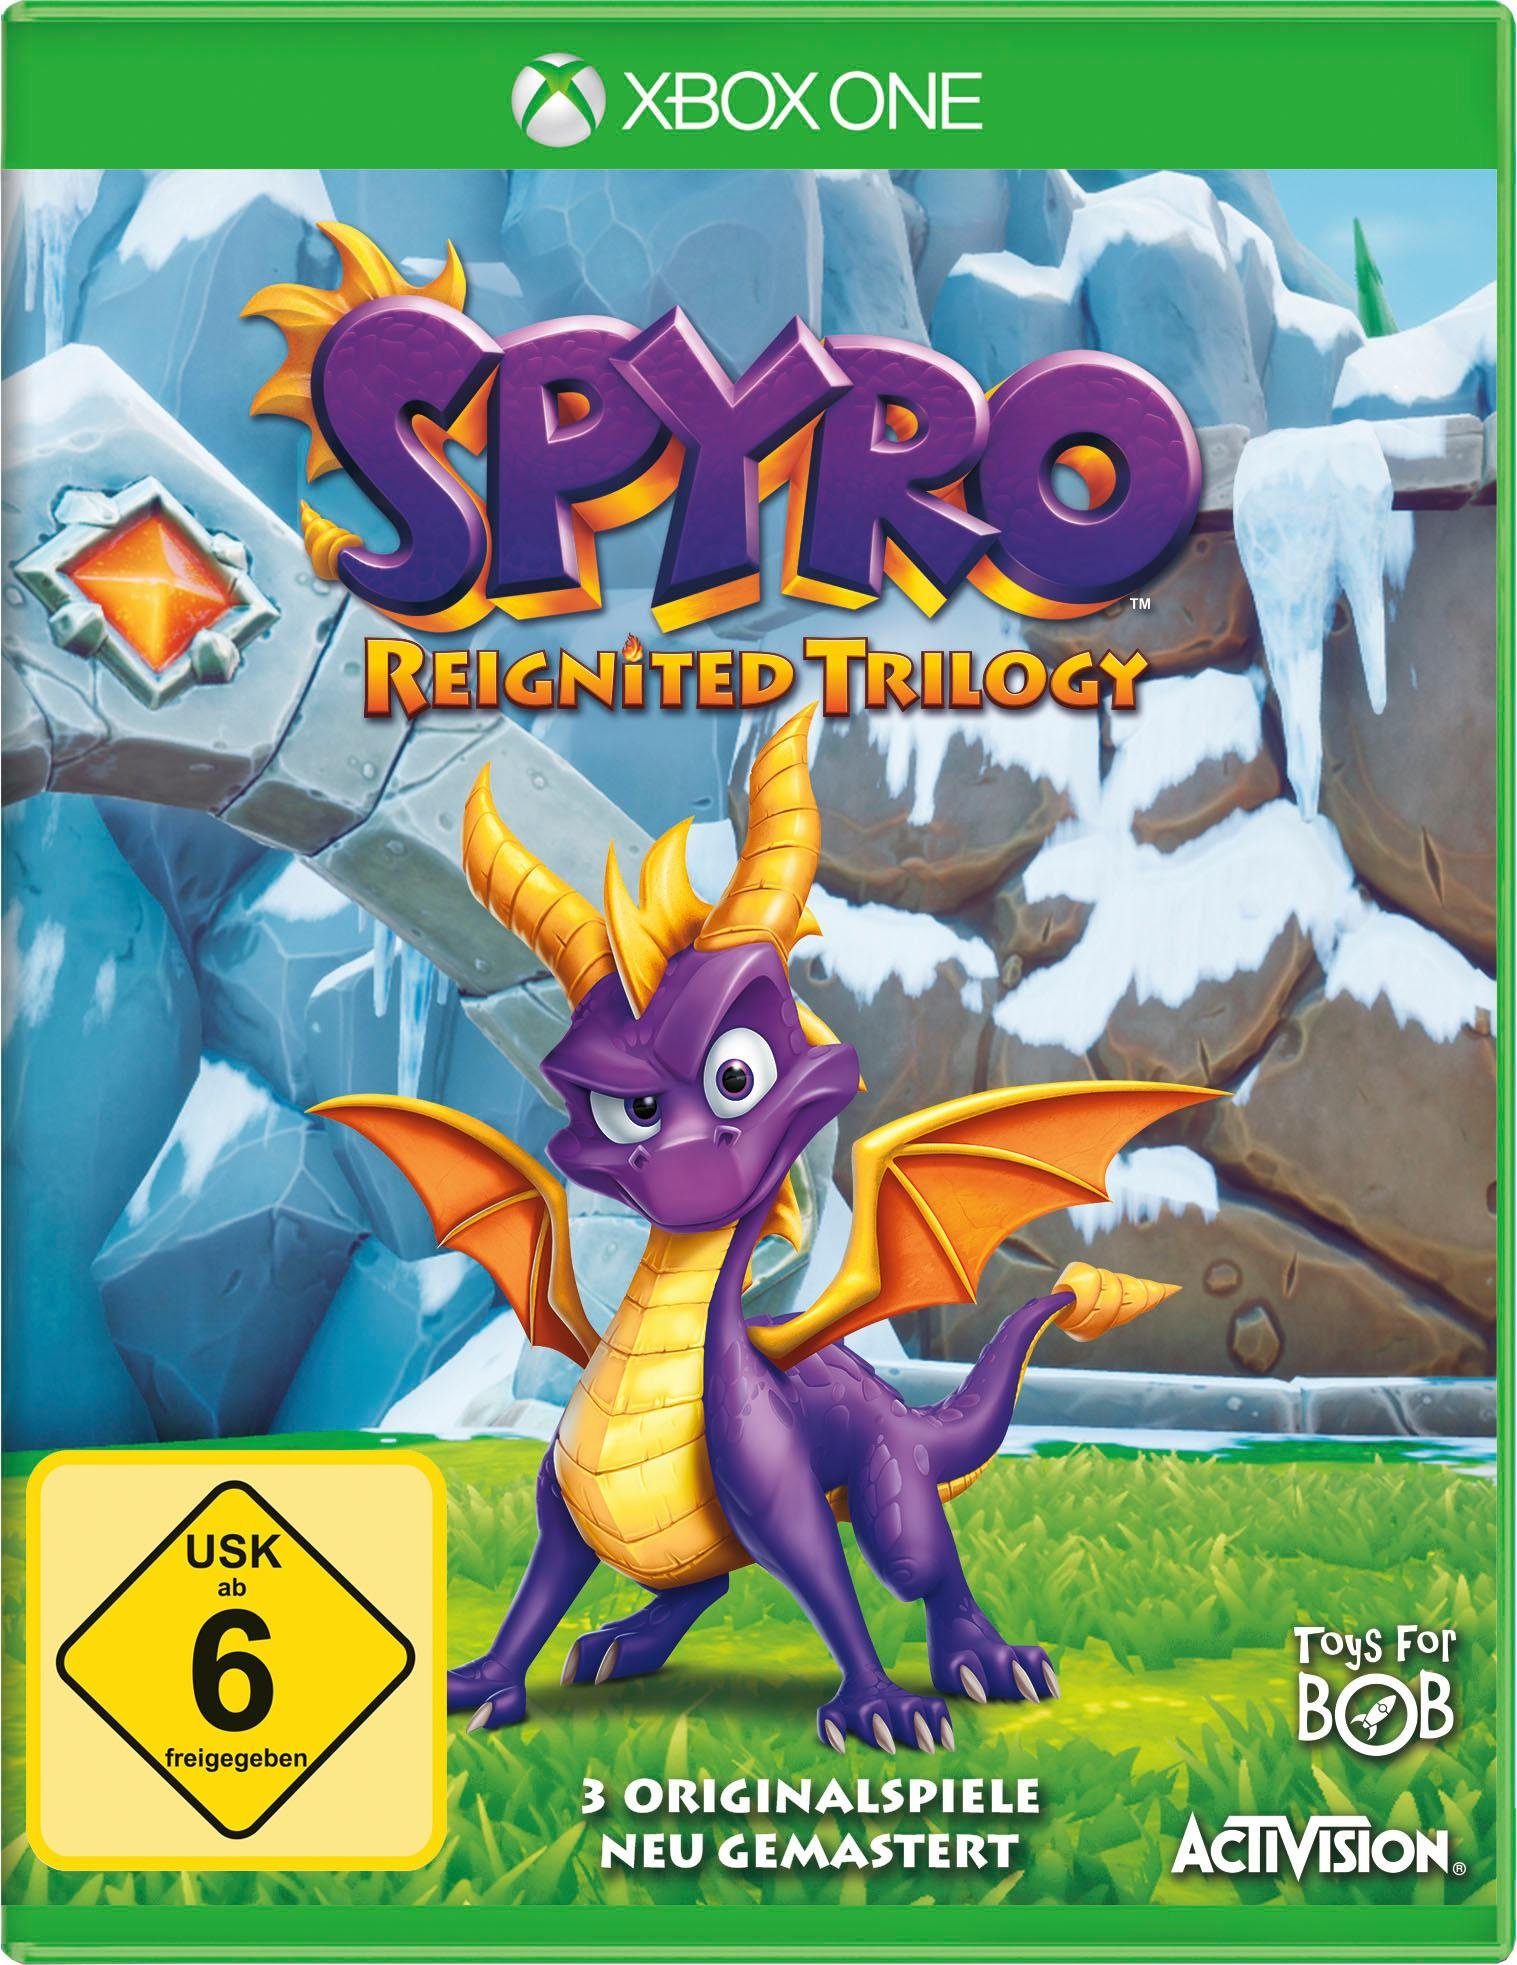 Trilogy Xbox One Spyro Reignited Activision